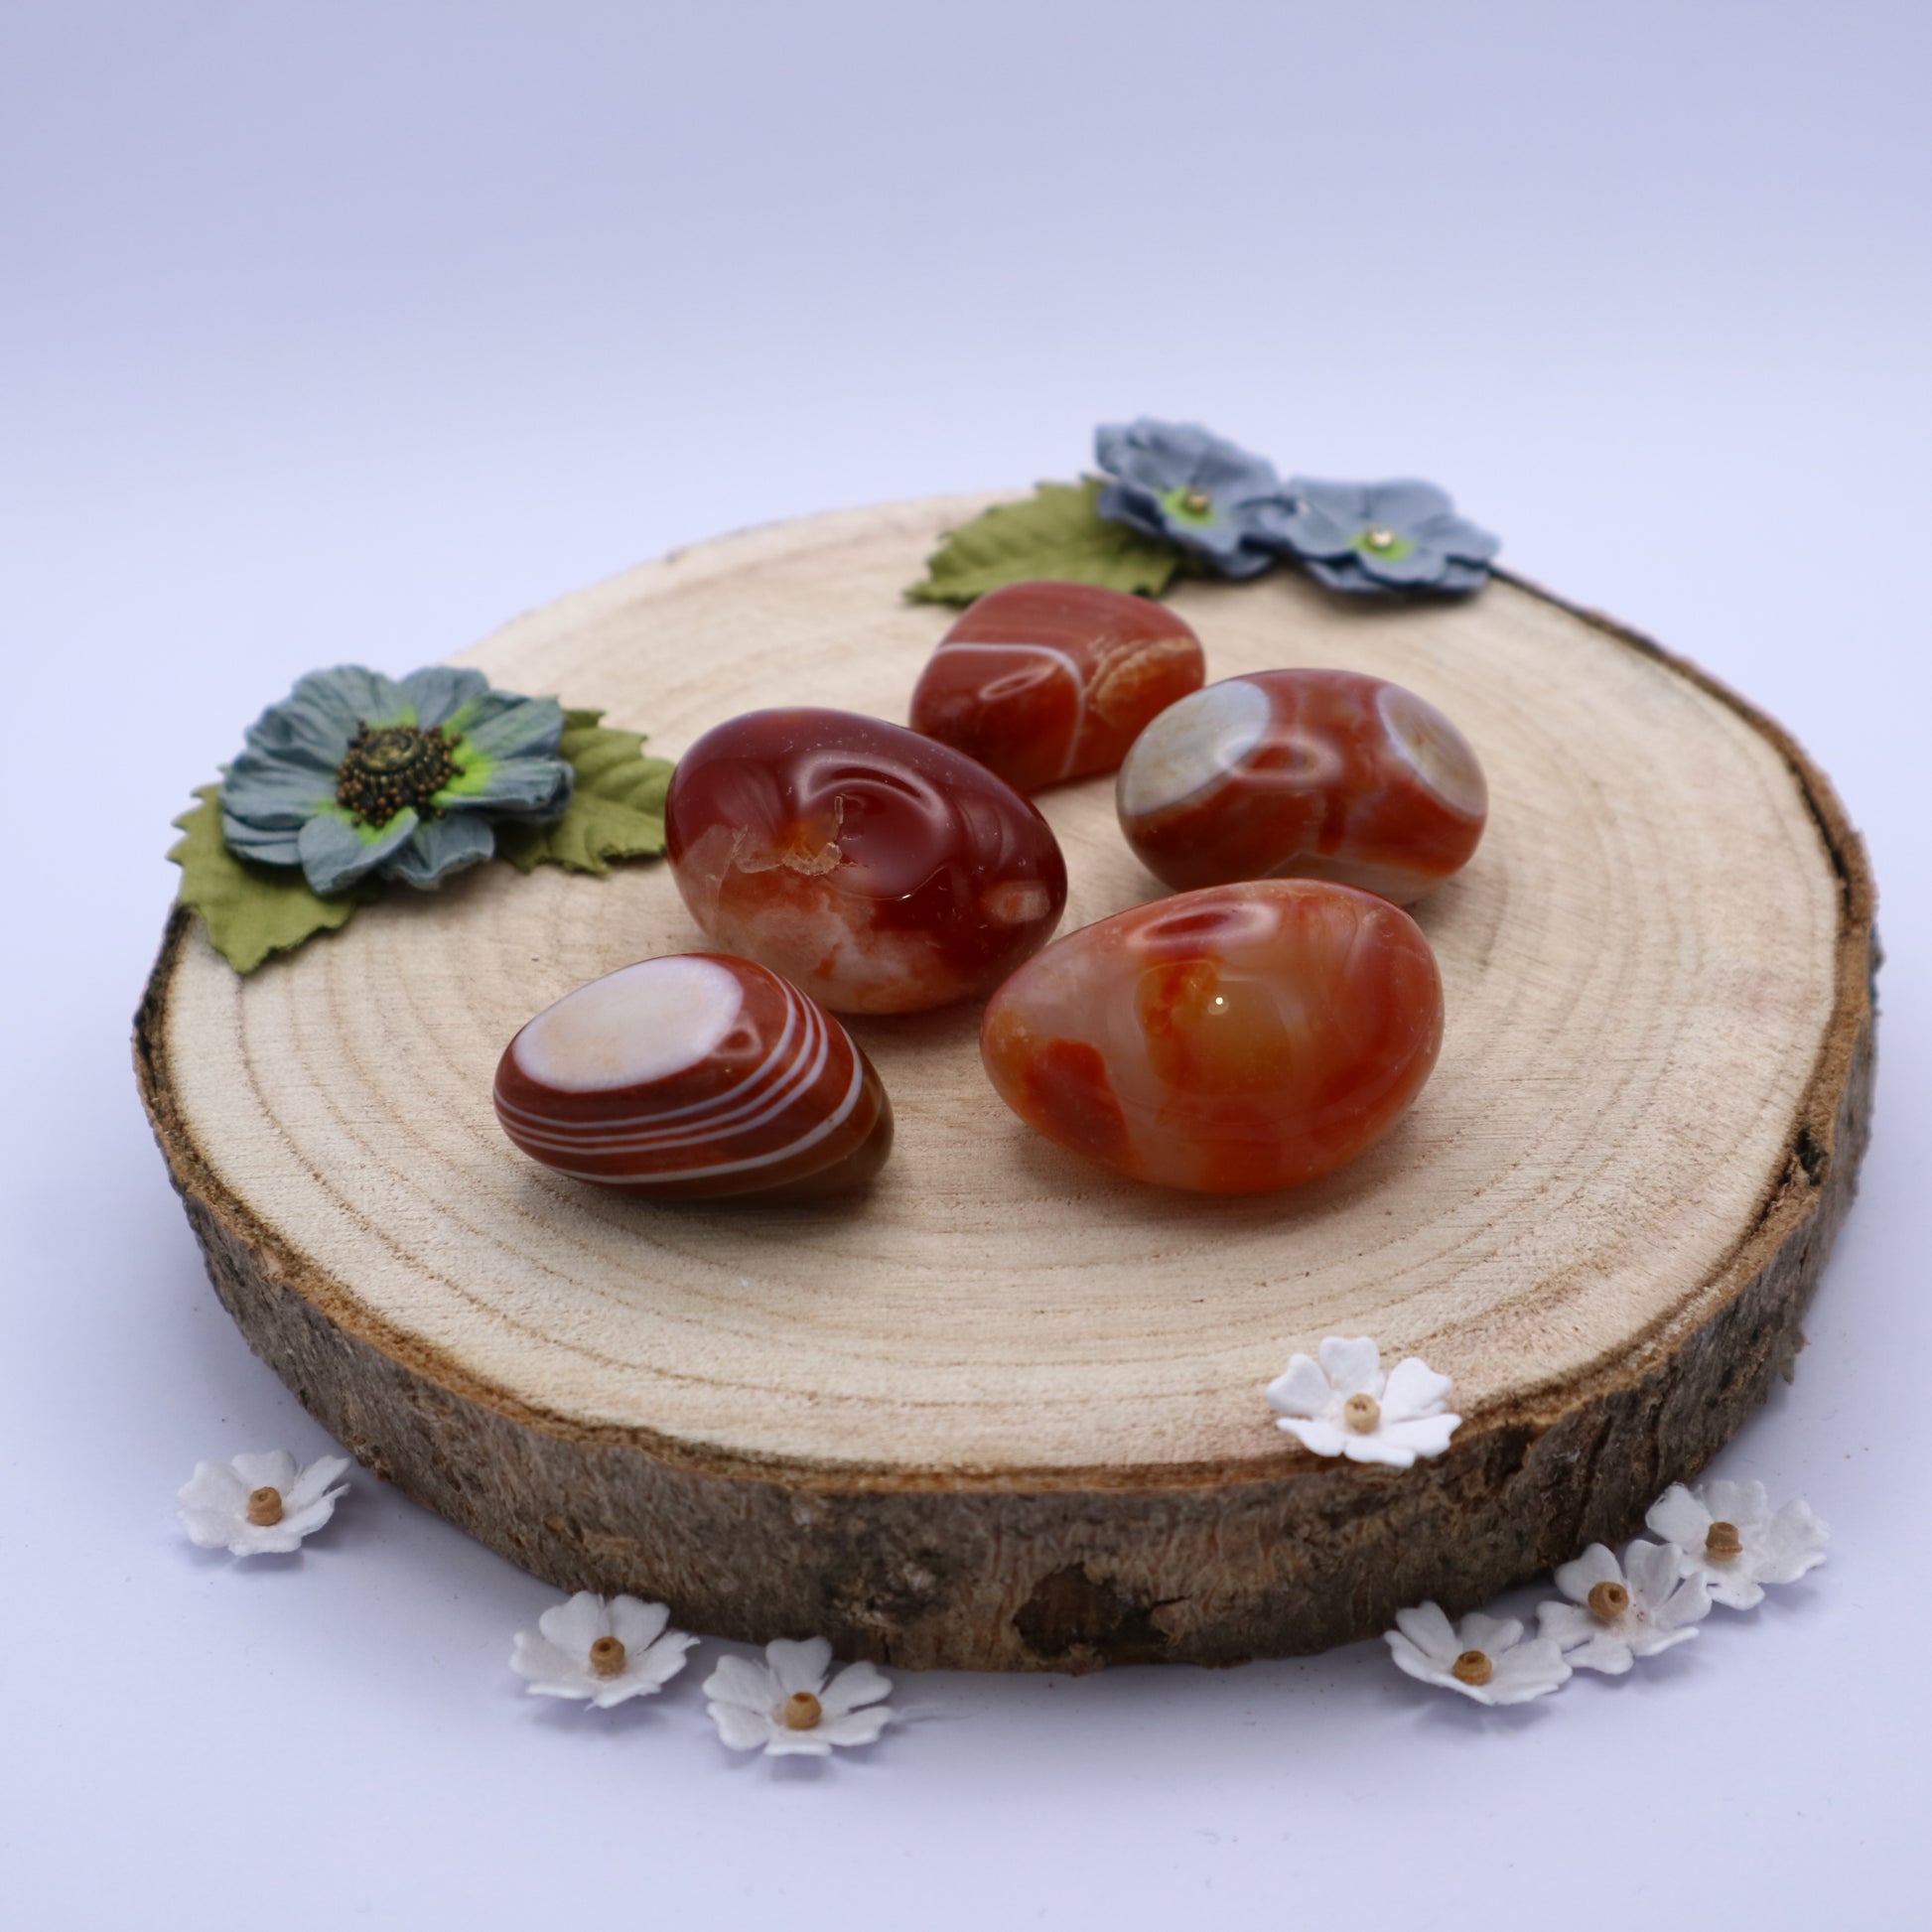 Five pieces of Sardonyx crystals displayed on a piece of wood surrounded by flowers